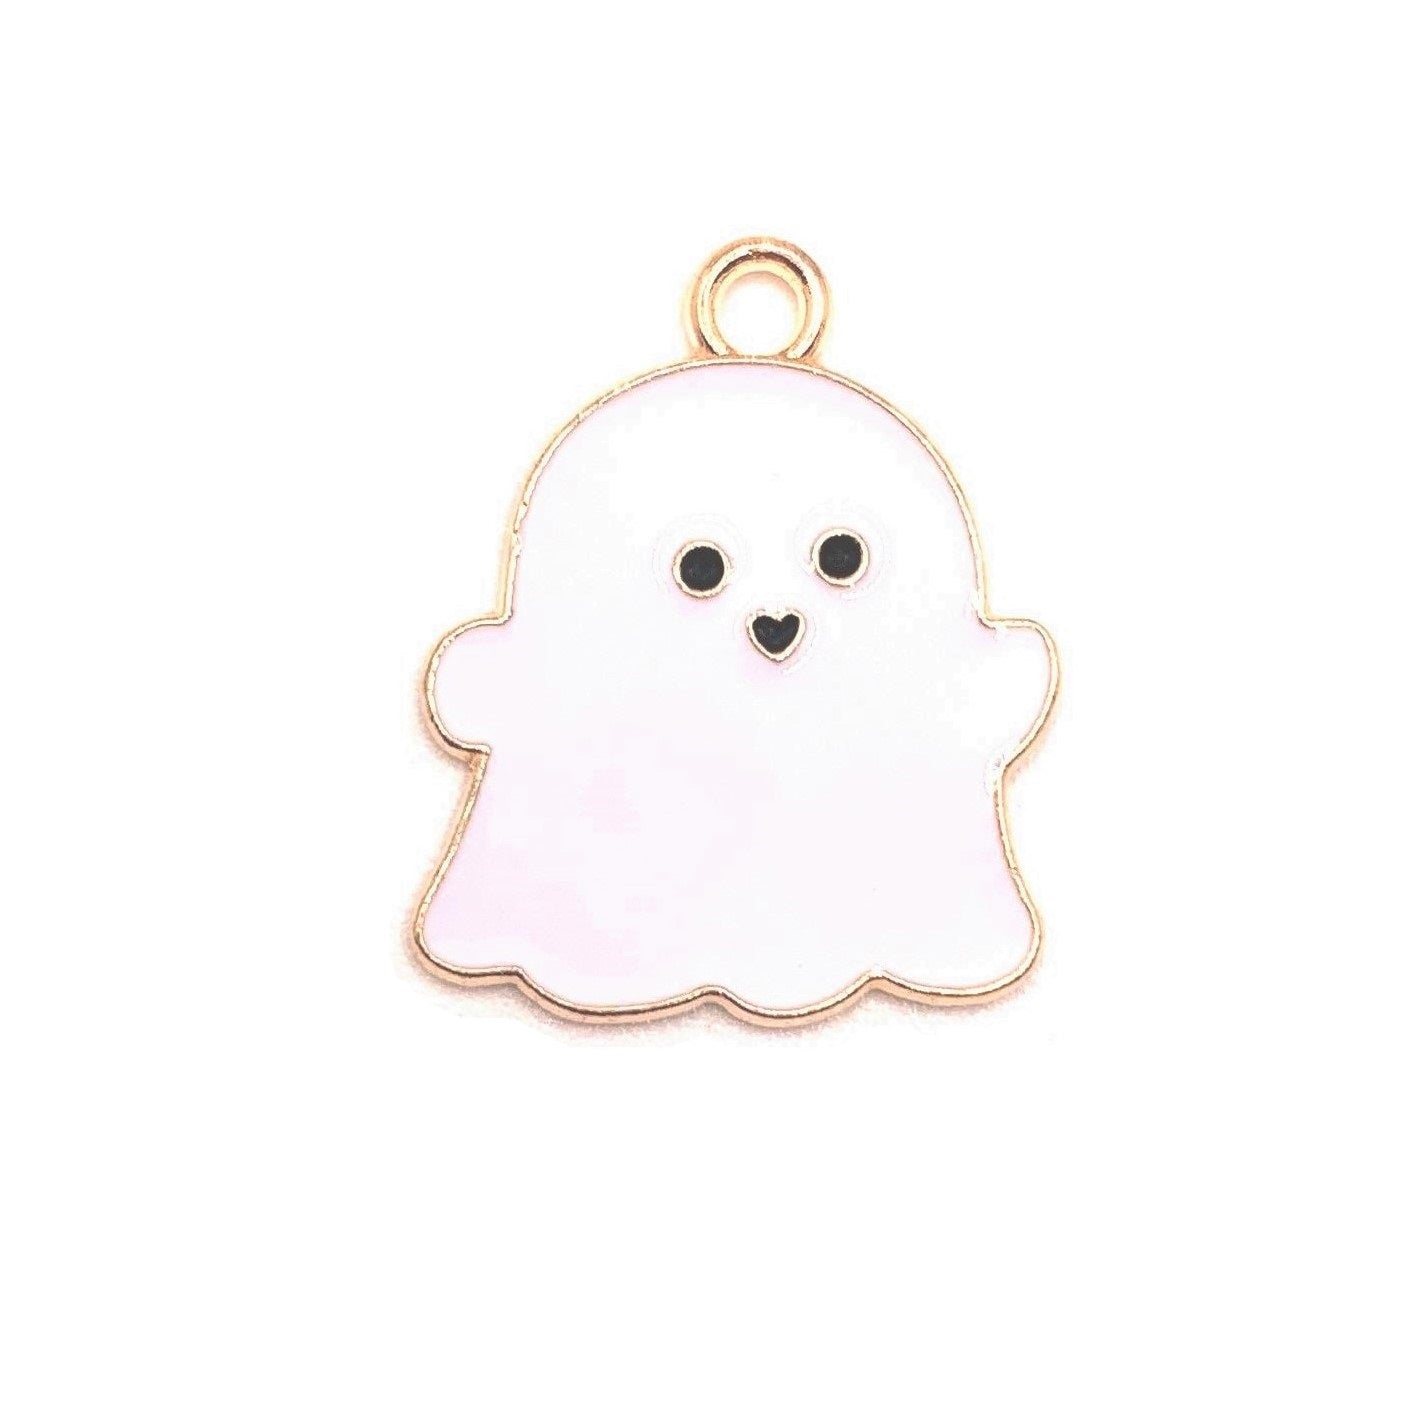 4, 20 or 50 Pieces: White Enamel Ghost Charms